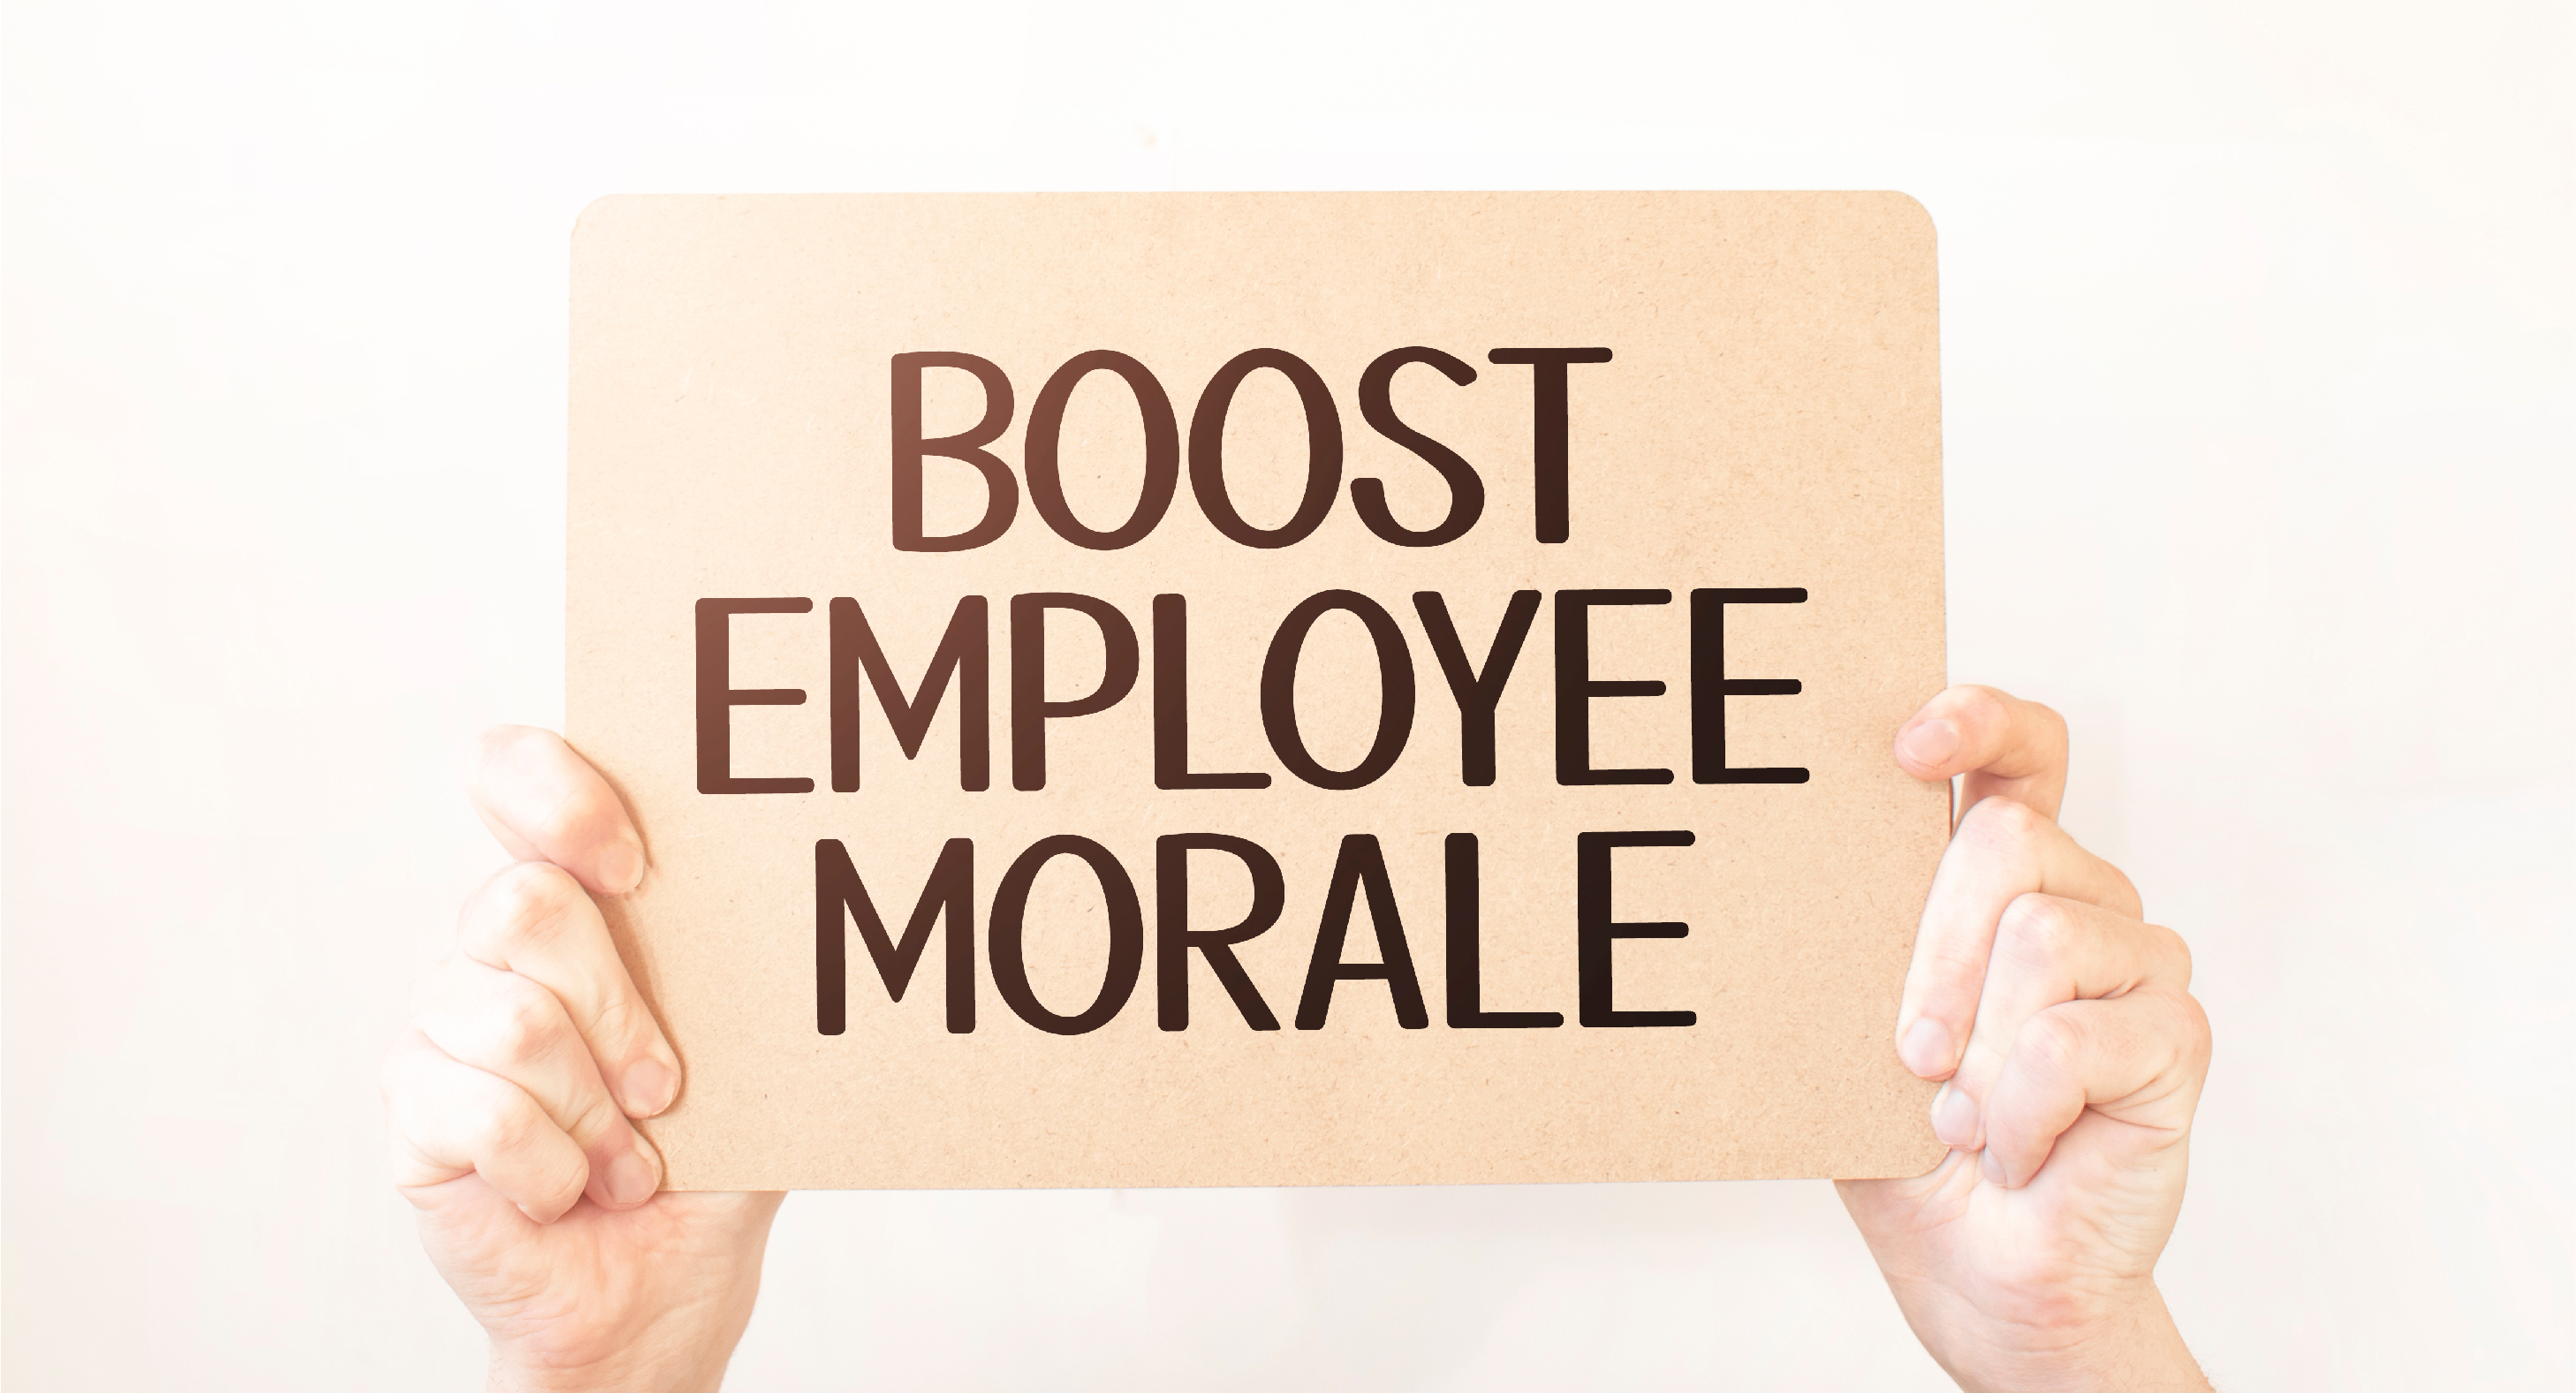 Boosting your team’s morale